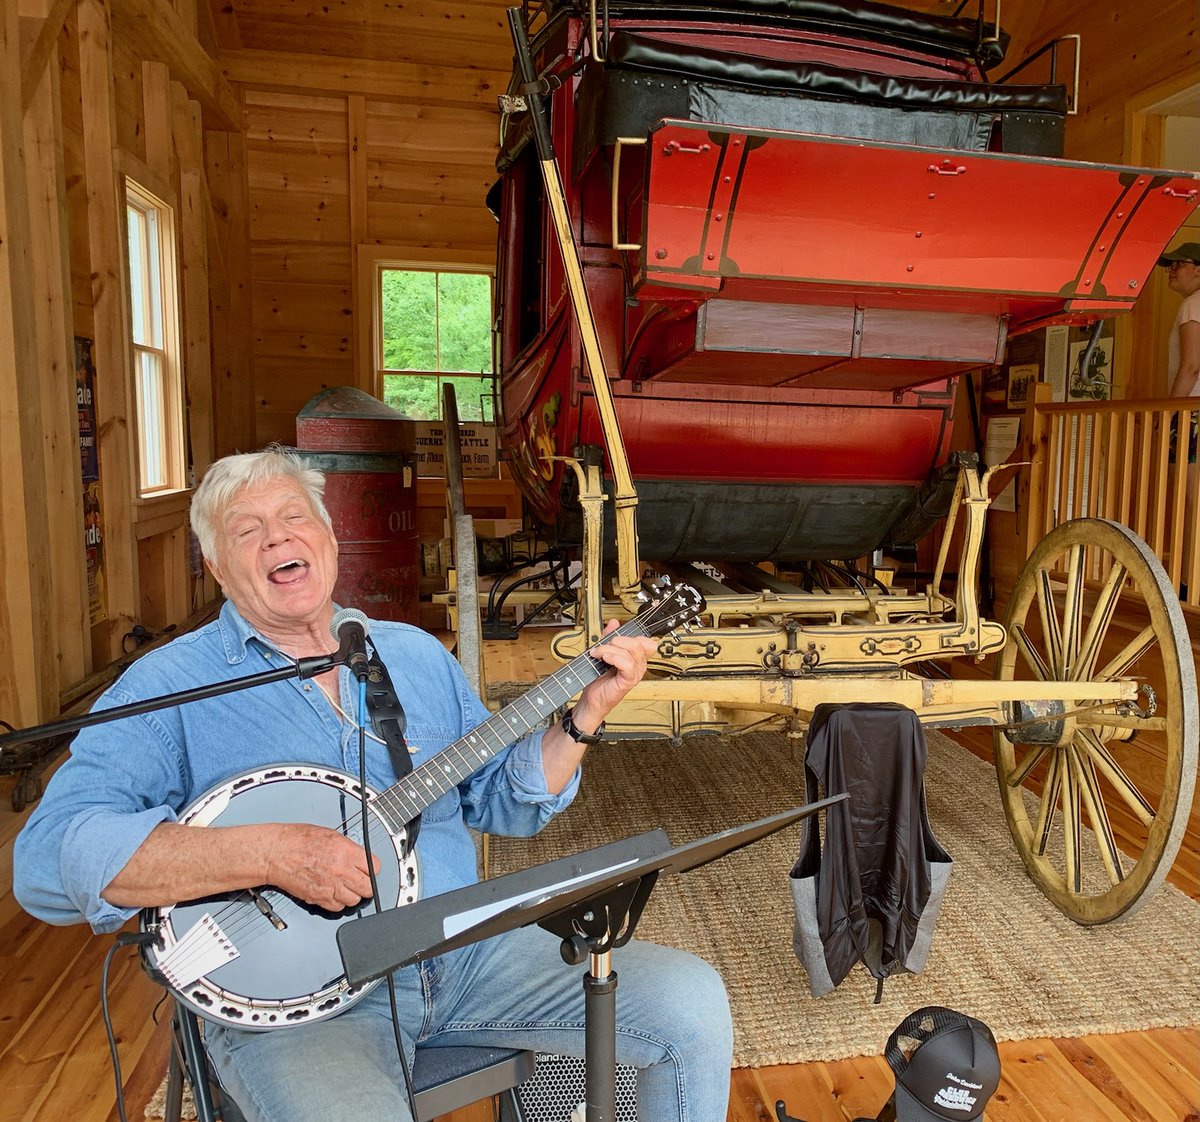 This past weekend, I sang at an arts festival here in Sandwich at the Quimby Barn Museum, next to the real Concord State coach. Man, I had a great time. I even did a couple songs with banjo and kazoo. sandwichhistorical.org/transportation…